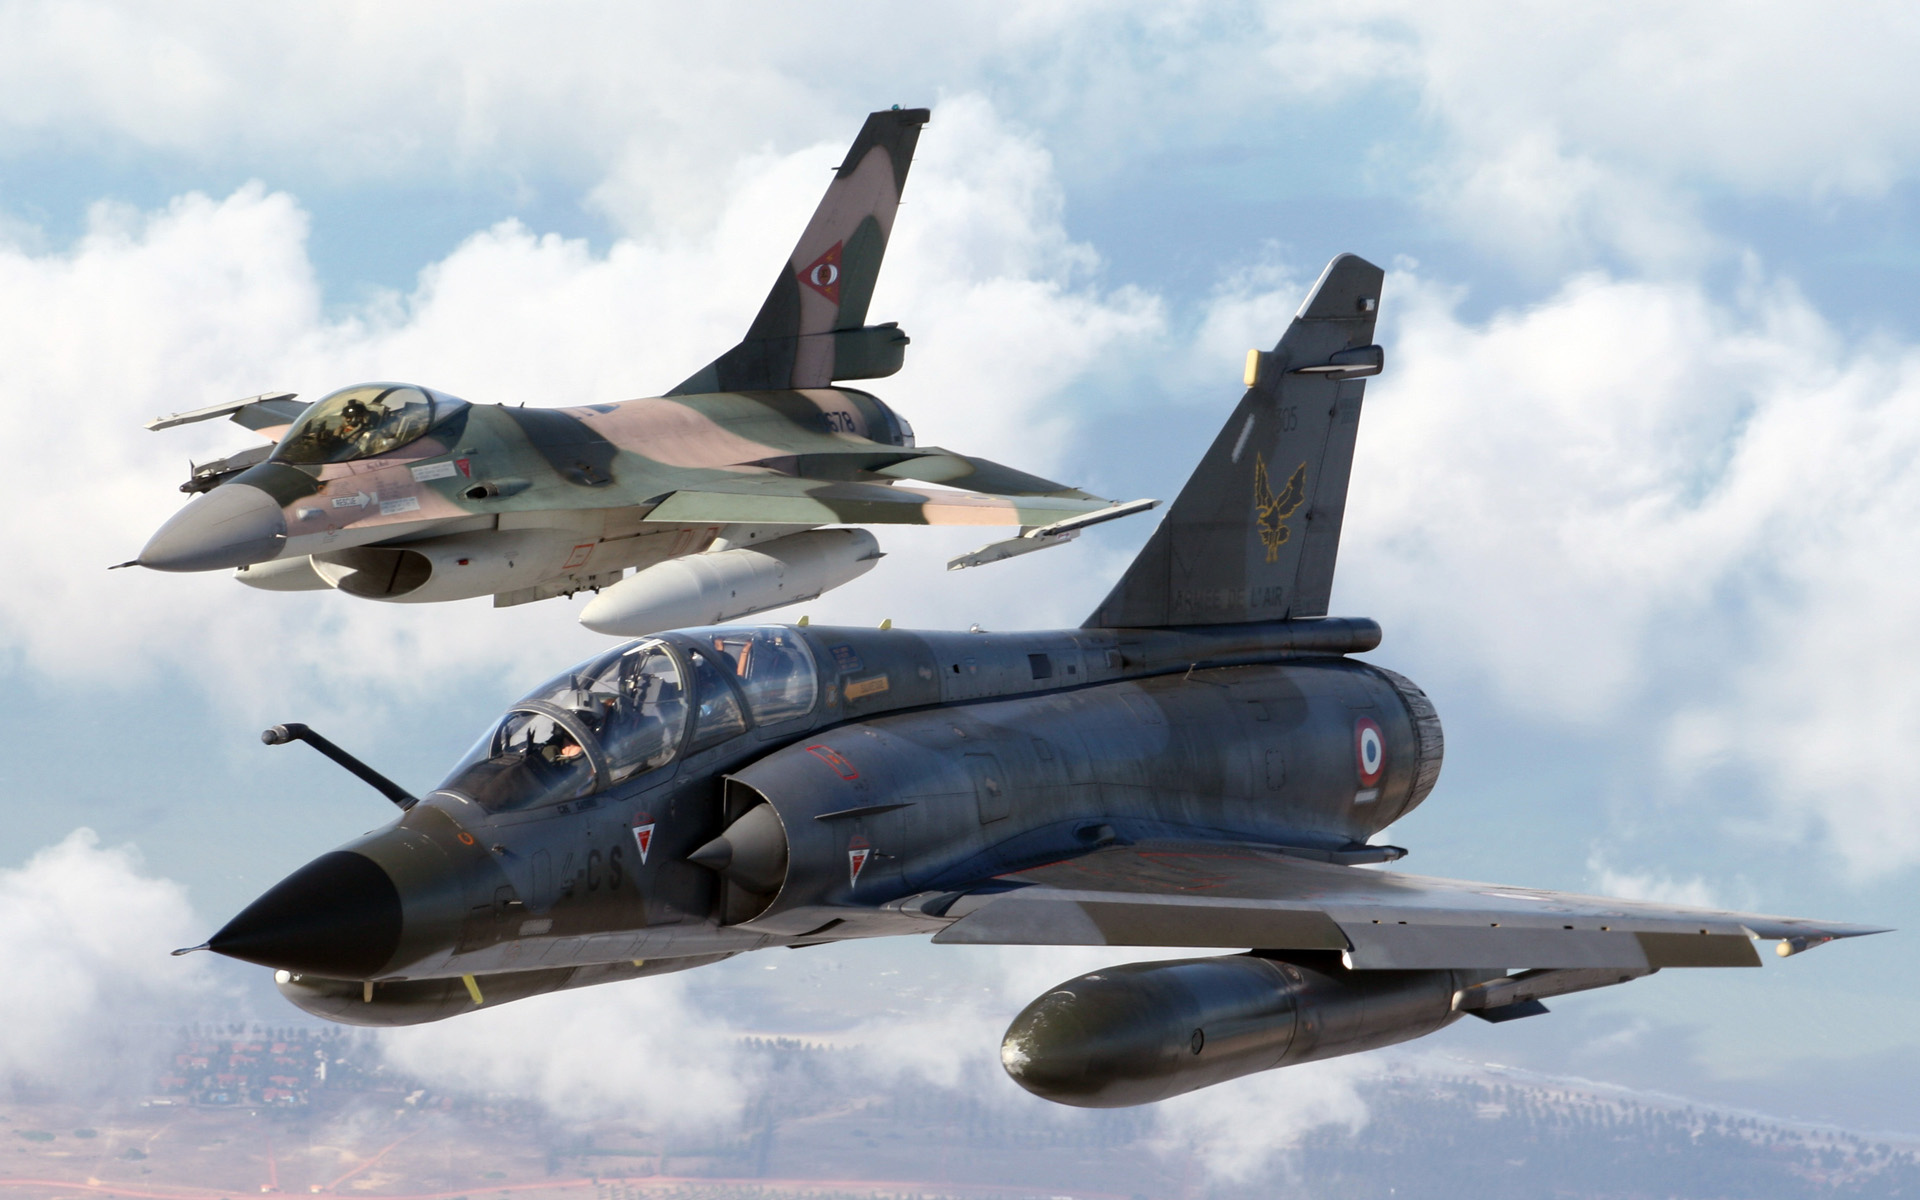 Mirage and Fighting Falcon soaring through the sky, a powerful duo of military jet fighters.